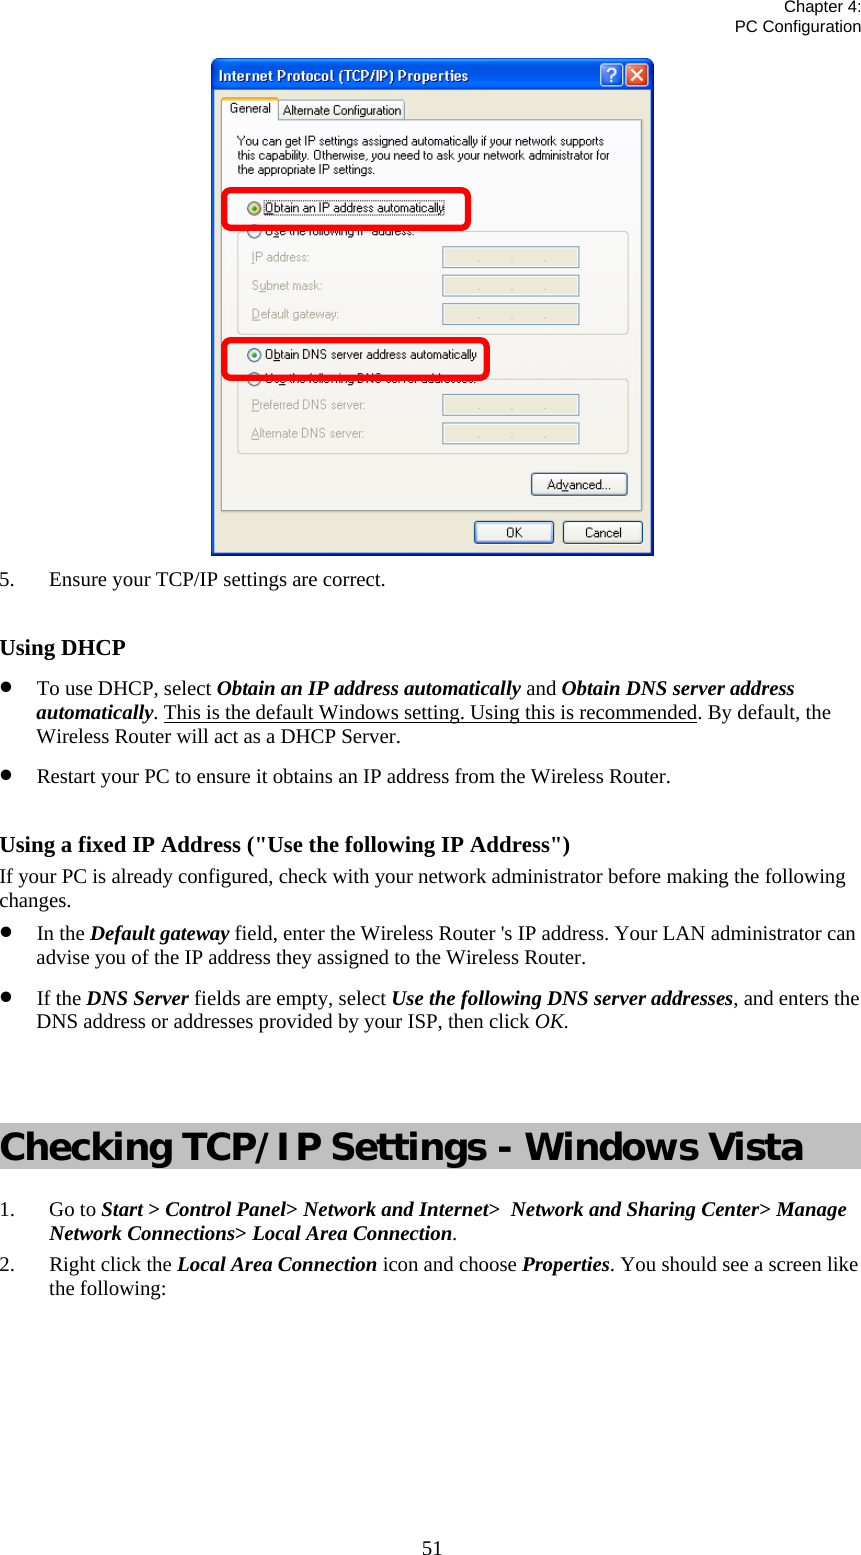   Chapter 4:  PC Configuration  51 5. Ensure your TCP/IP settings are correct.  Using DHCP • To use DHCP, select Obtain an IP address automatically and Obtain DNS server address automatically. This is the default Windows setting. Using this is recommended. By default, the Wireless Router will act as a DHCP Server. • Restart your PC to ensure it obtains an IP address from the Wireless Router.  Using a fixed IP Address (&quot;Use the following IP Address&quot;) If your PC is already configured, check with your network administrator before making the following changes. • In the Default gateway field, enter the Wireless Router &apos;s IP address. Your LAN administrator can advise you of the IP address they assigned to the Wireless Router. • If the DNS Server fields are empty, select Use the following DNS server addresses, and enters the DNS address or addresses provided by your ISP, then click OK.   Checking TCP/IP Settings - Windows Vista 1. Go to Start &gt; Control Panel&gt; Network and Internet&gt;  Network and Sharing Center&gt; Manage Network Connections&gt; Local Area Connection. 2. Right click the Local Area Connection icon and choose Properties. You should see a screen like the following: 